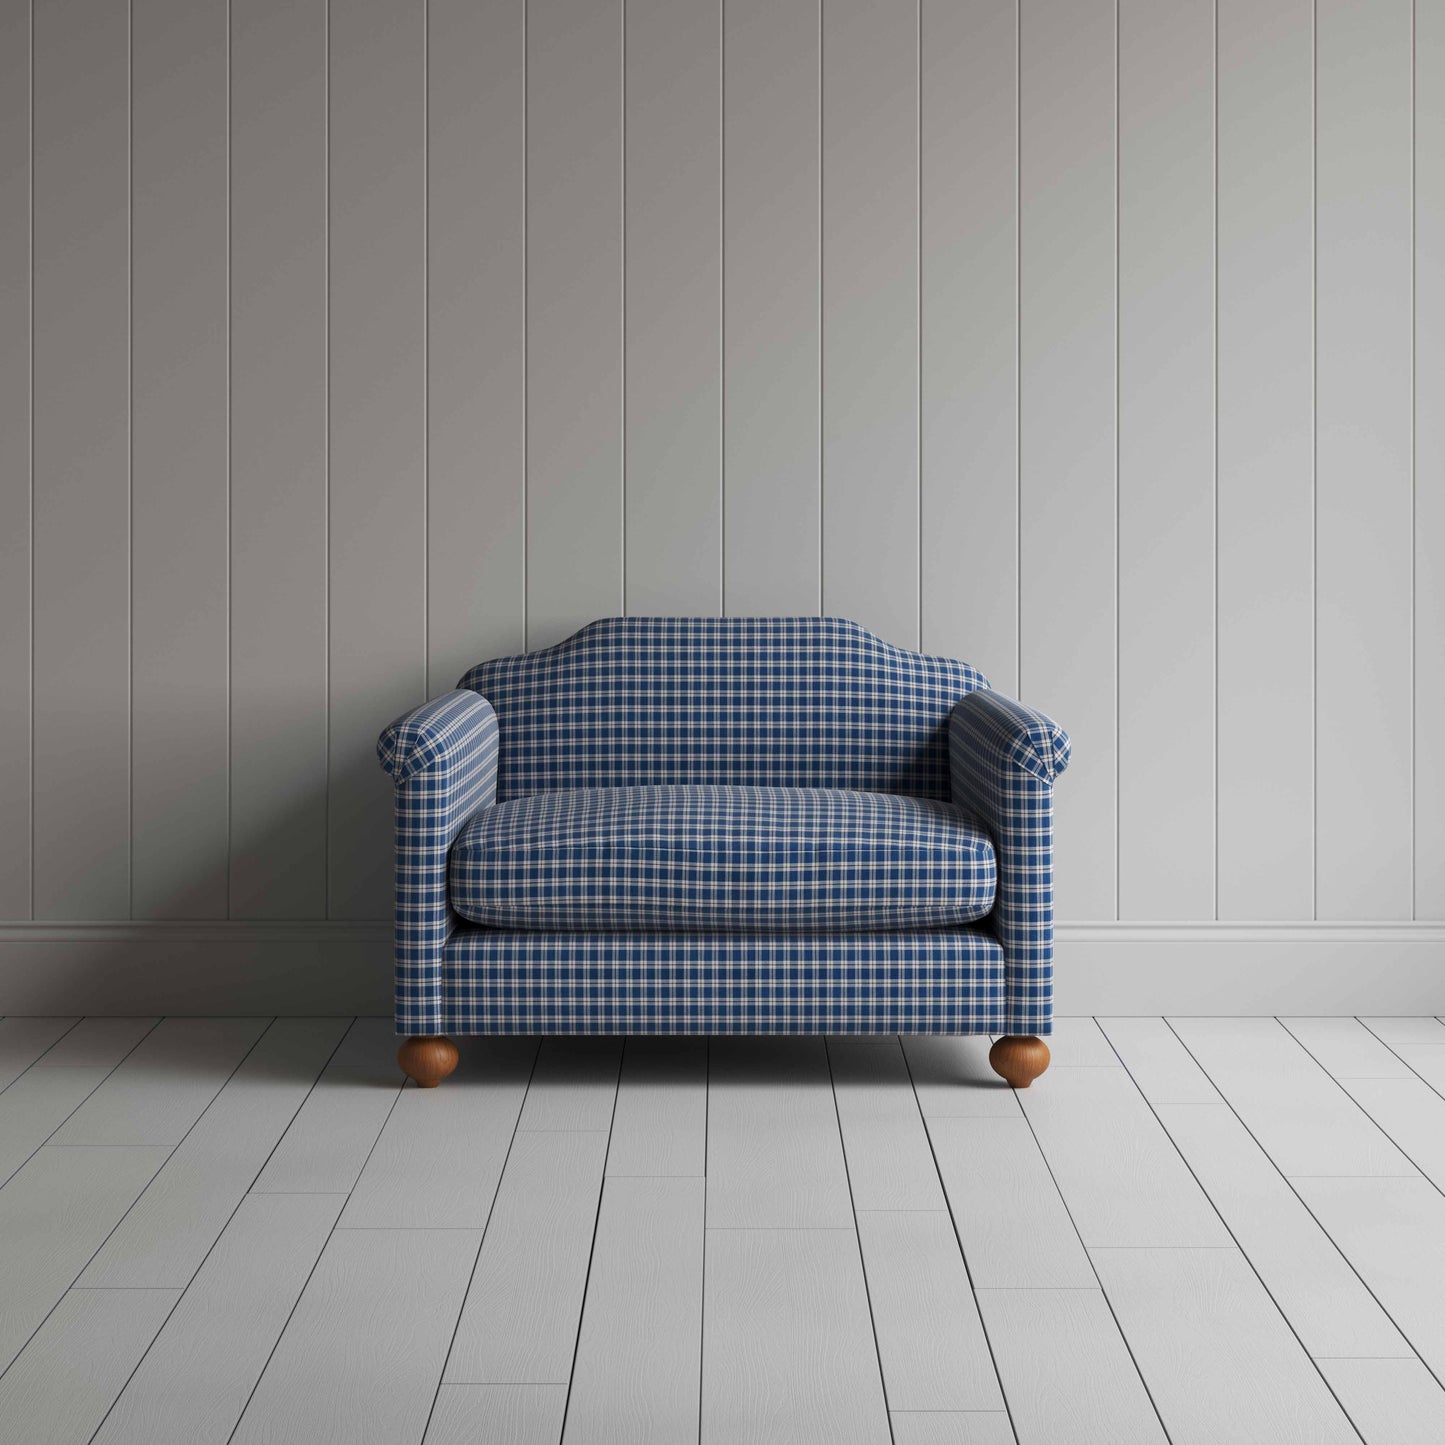 Dolittle Love Seat in Well Plaid Cotton, Blue Brown